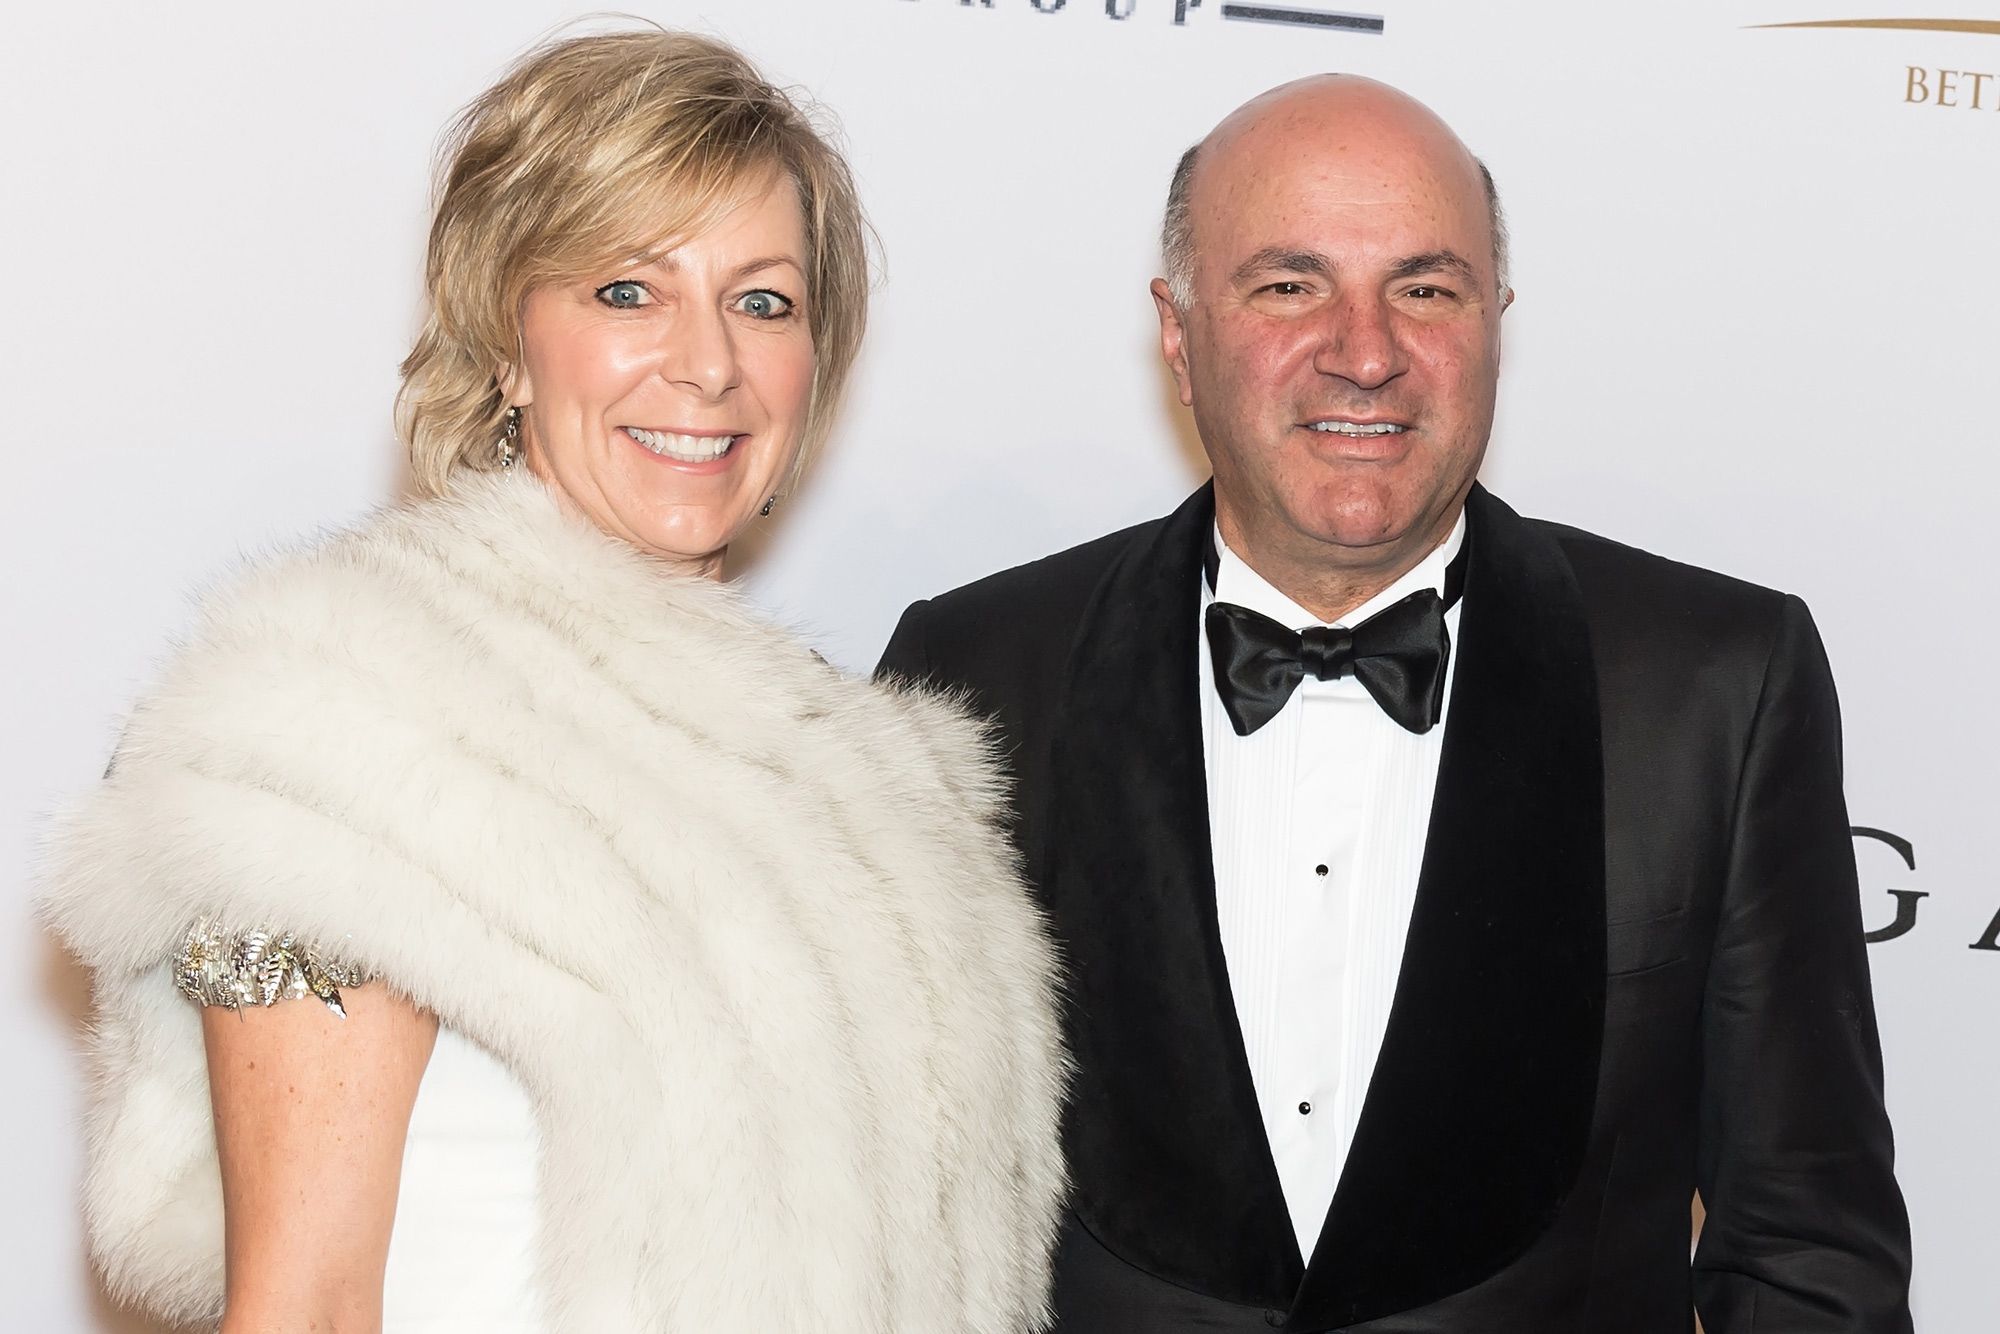 Kevin O Leary and Wife Linda O Leary Boat Accident And What to Know So Far About The Shark Tank Star!